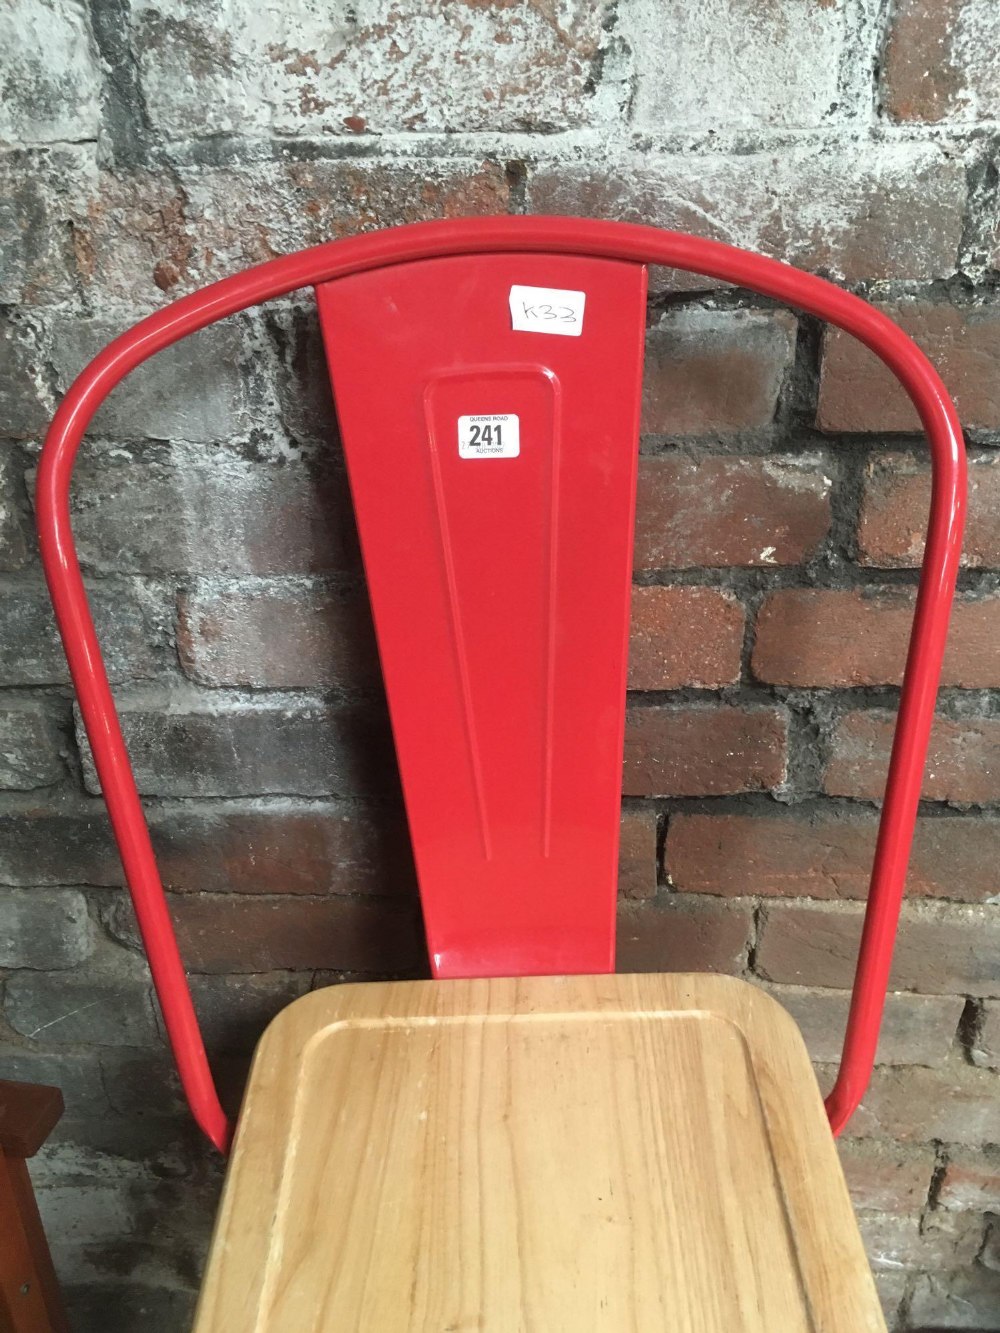 RED METAL BAR KITCHEN STOOL WITH WOODEN SEAT - Image 3 of 3